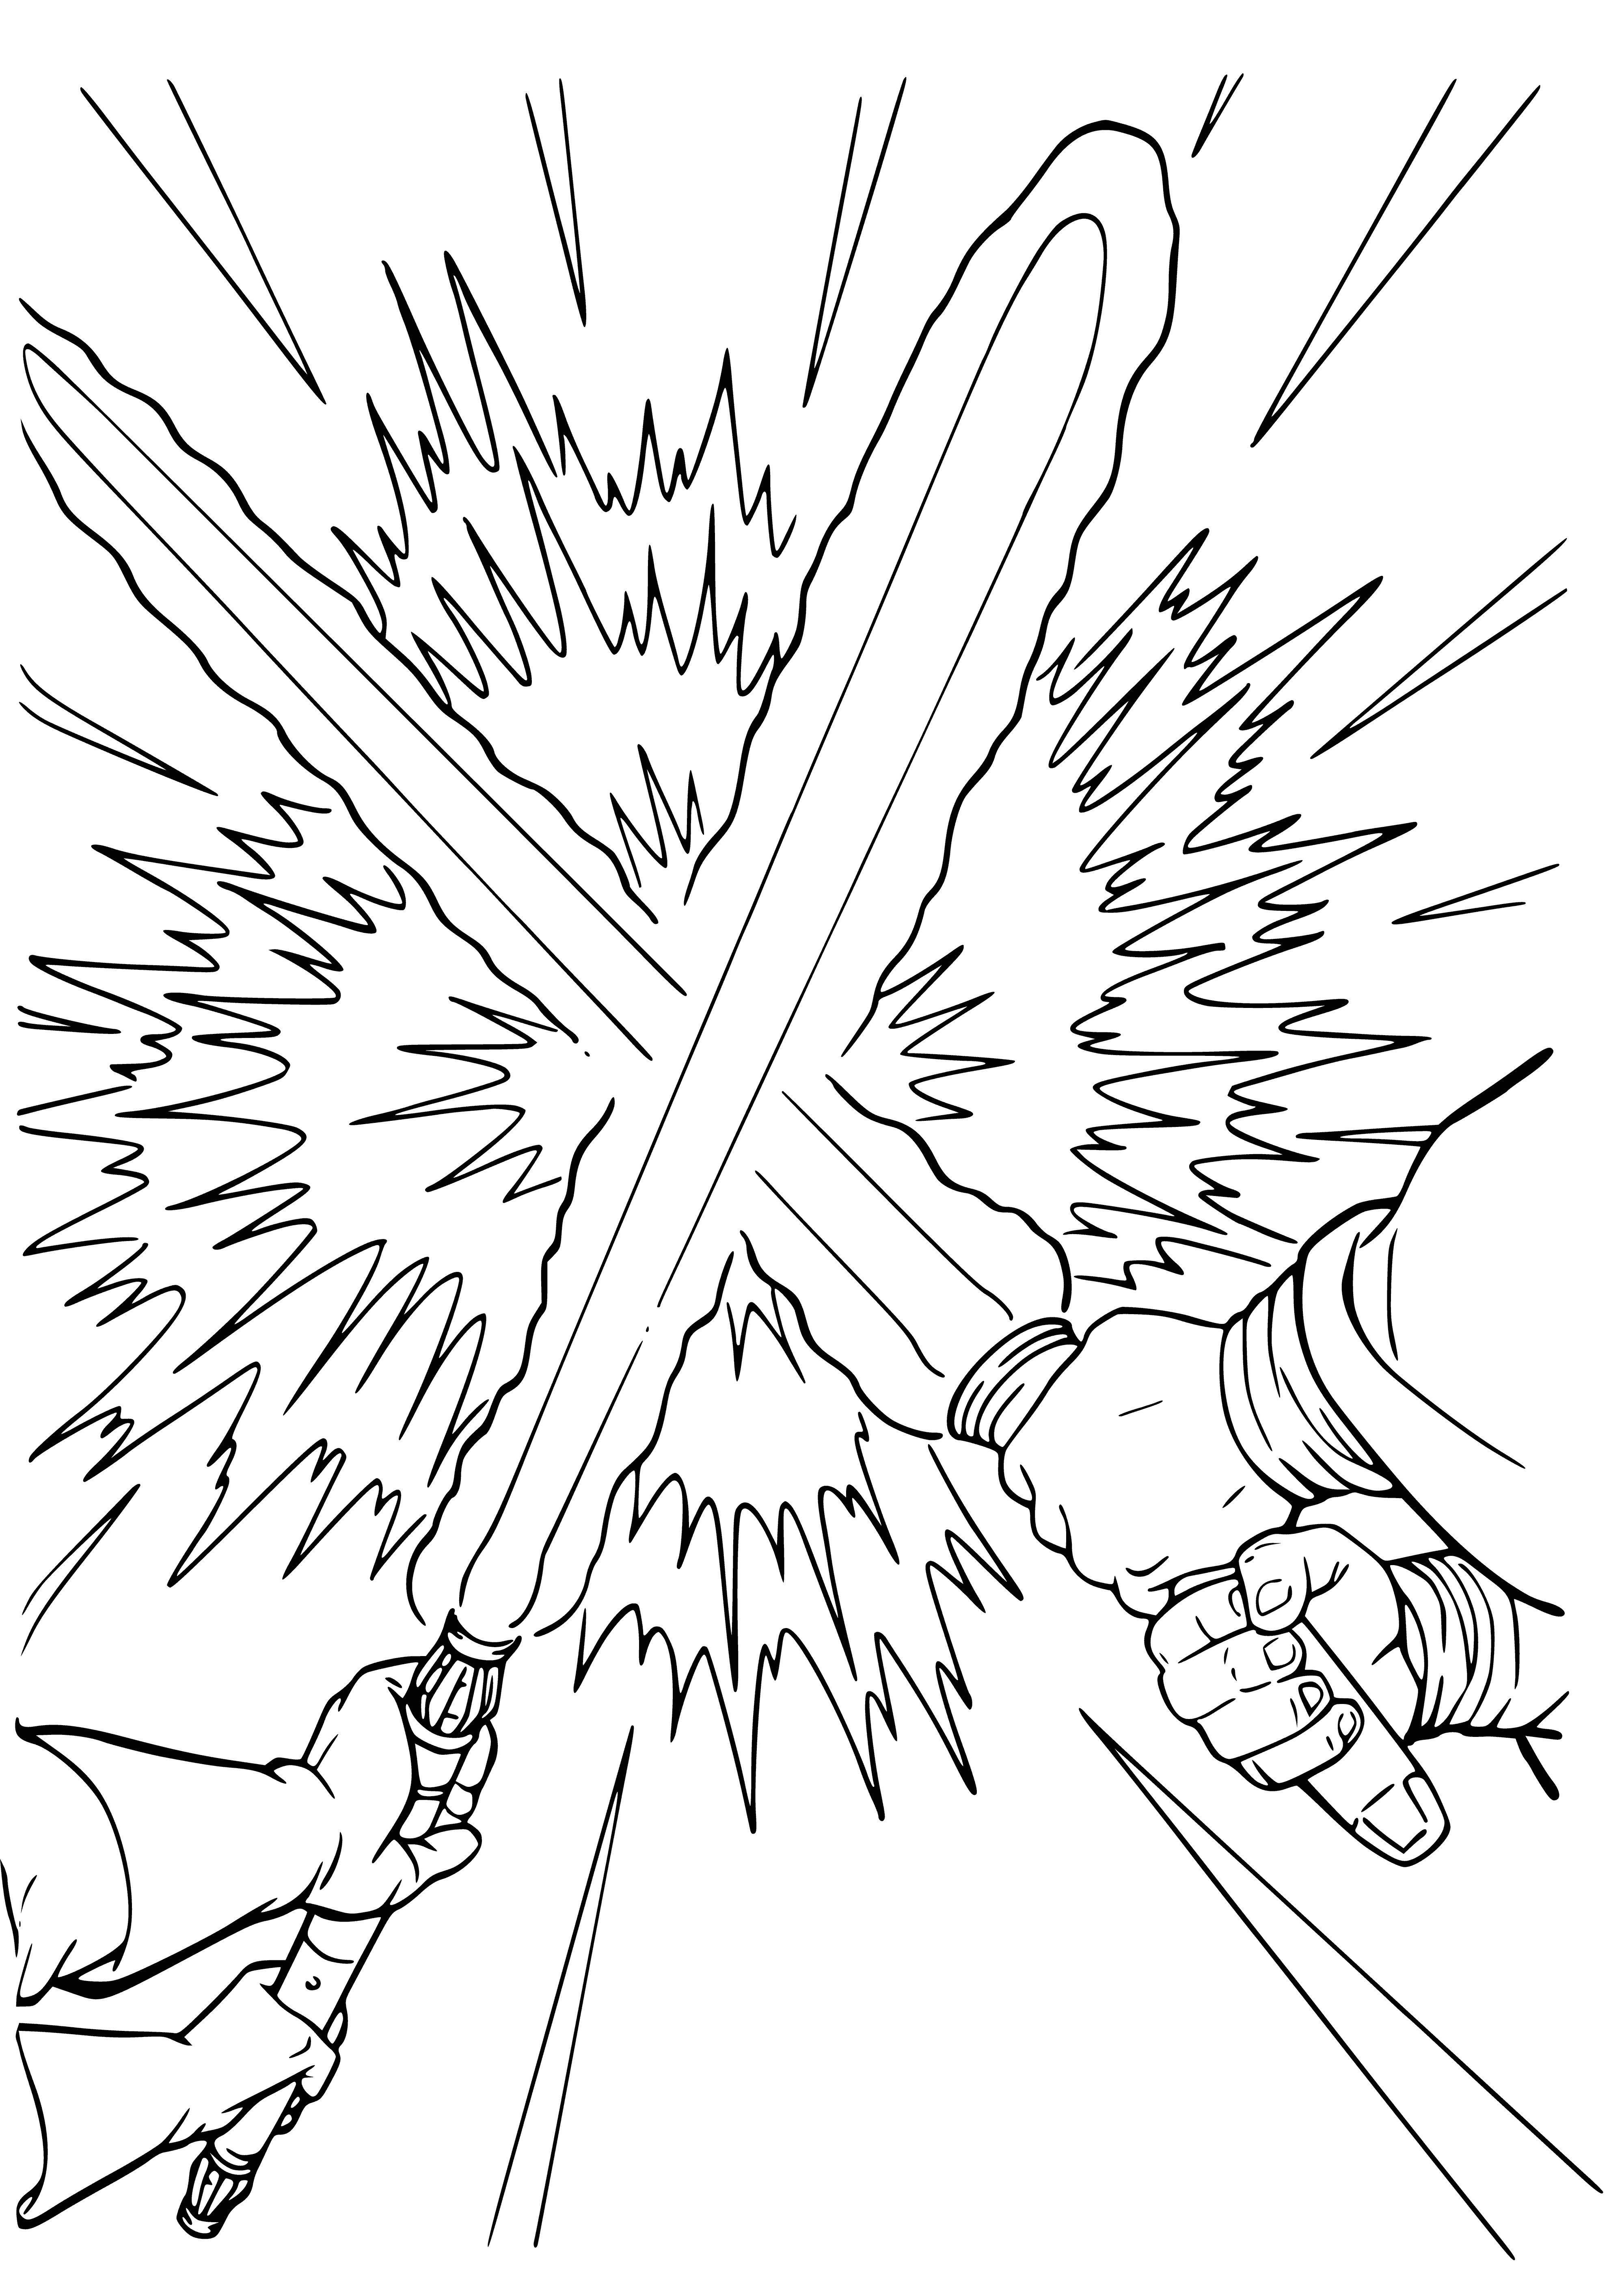 coloring page: Darth Maul, Qui-Gon Jinn and Darth Sidious brandish their lightsabers on a Naboo skiff, with a Jedi starfighter and a Royal Starship in the background.